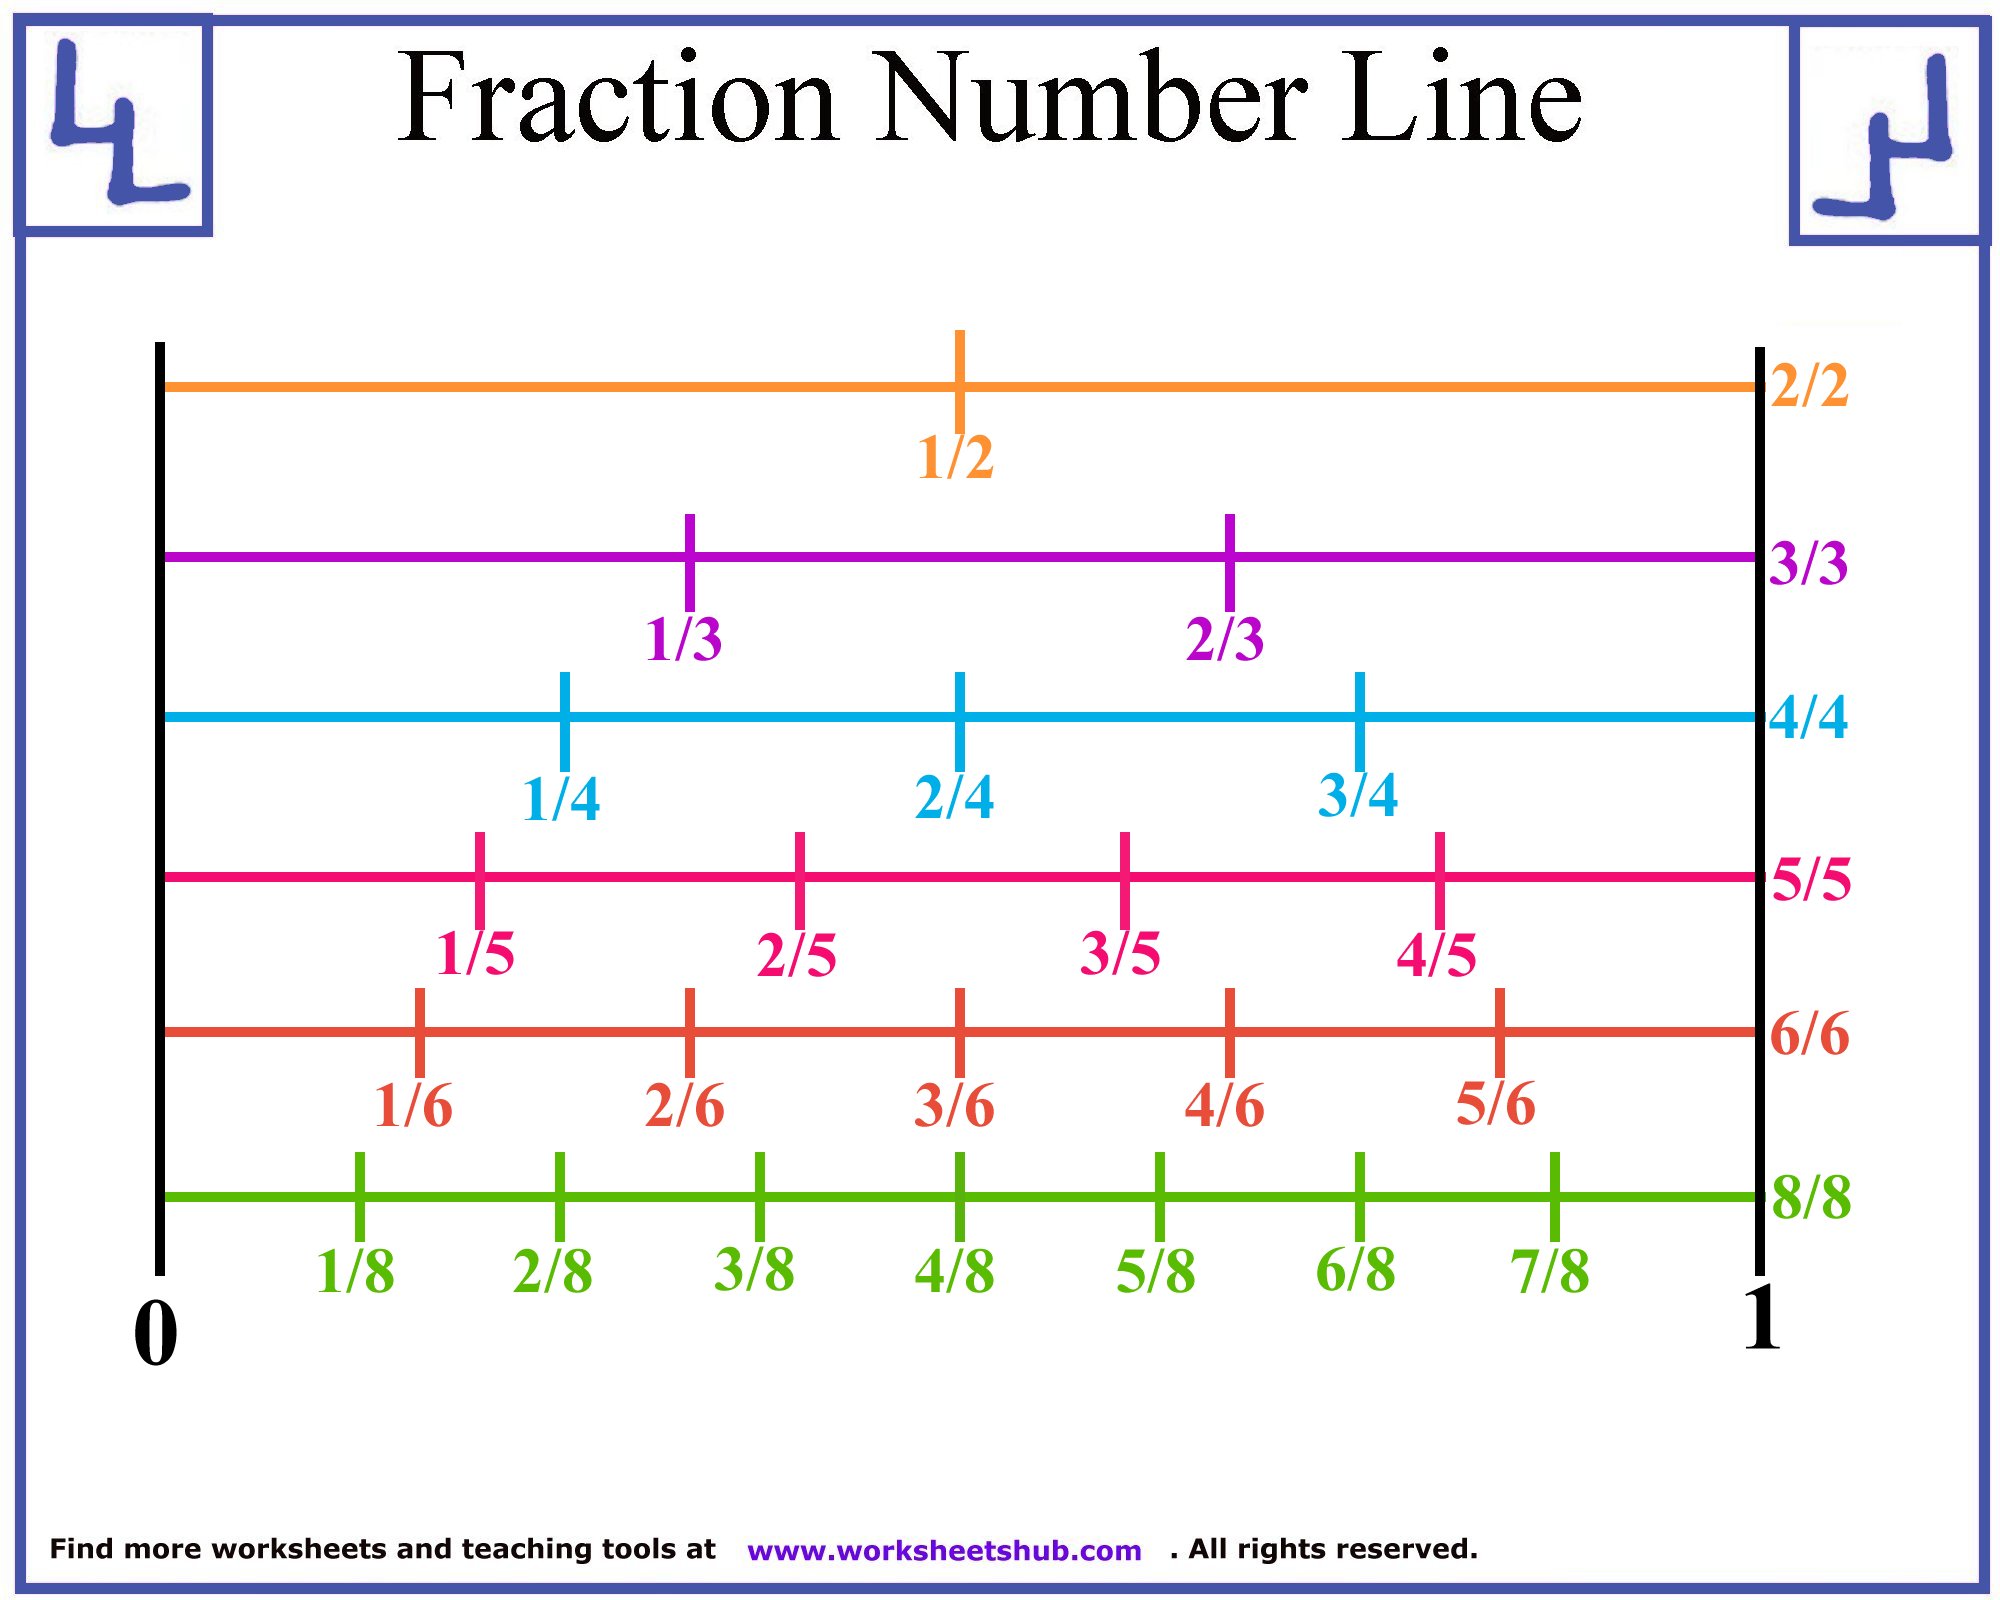 equivalent-fractions-on-a-number-line